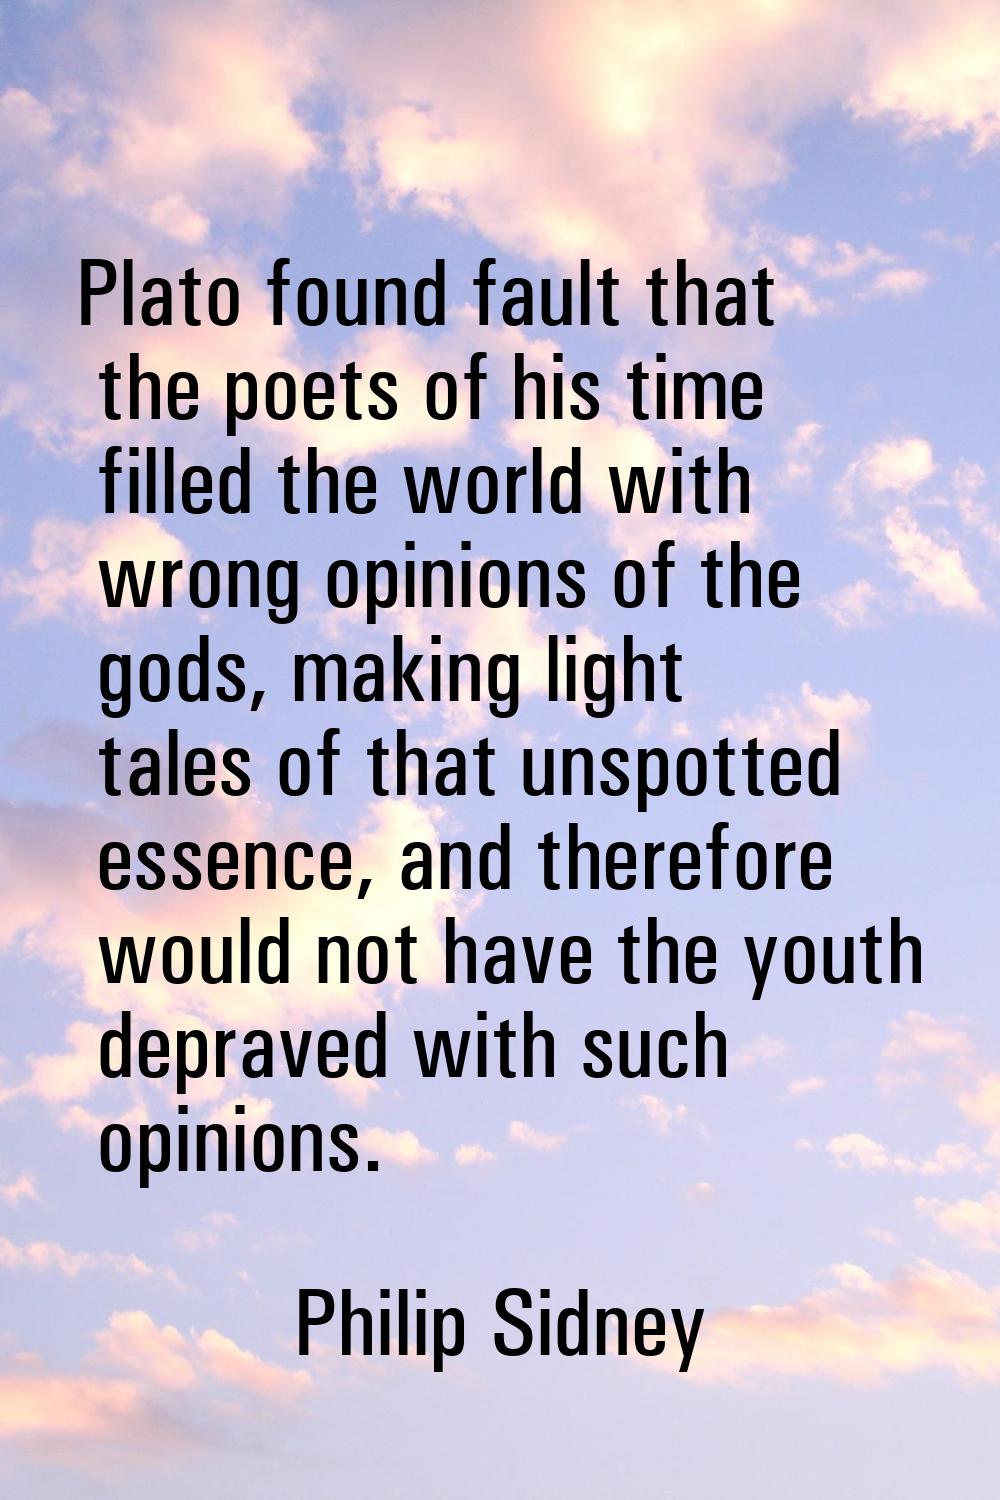 Plato found fault that the poets of his time filled the world with wrong opinions of the gods, maki